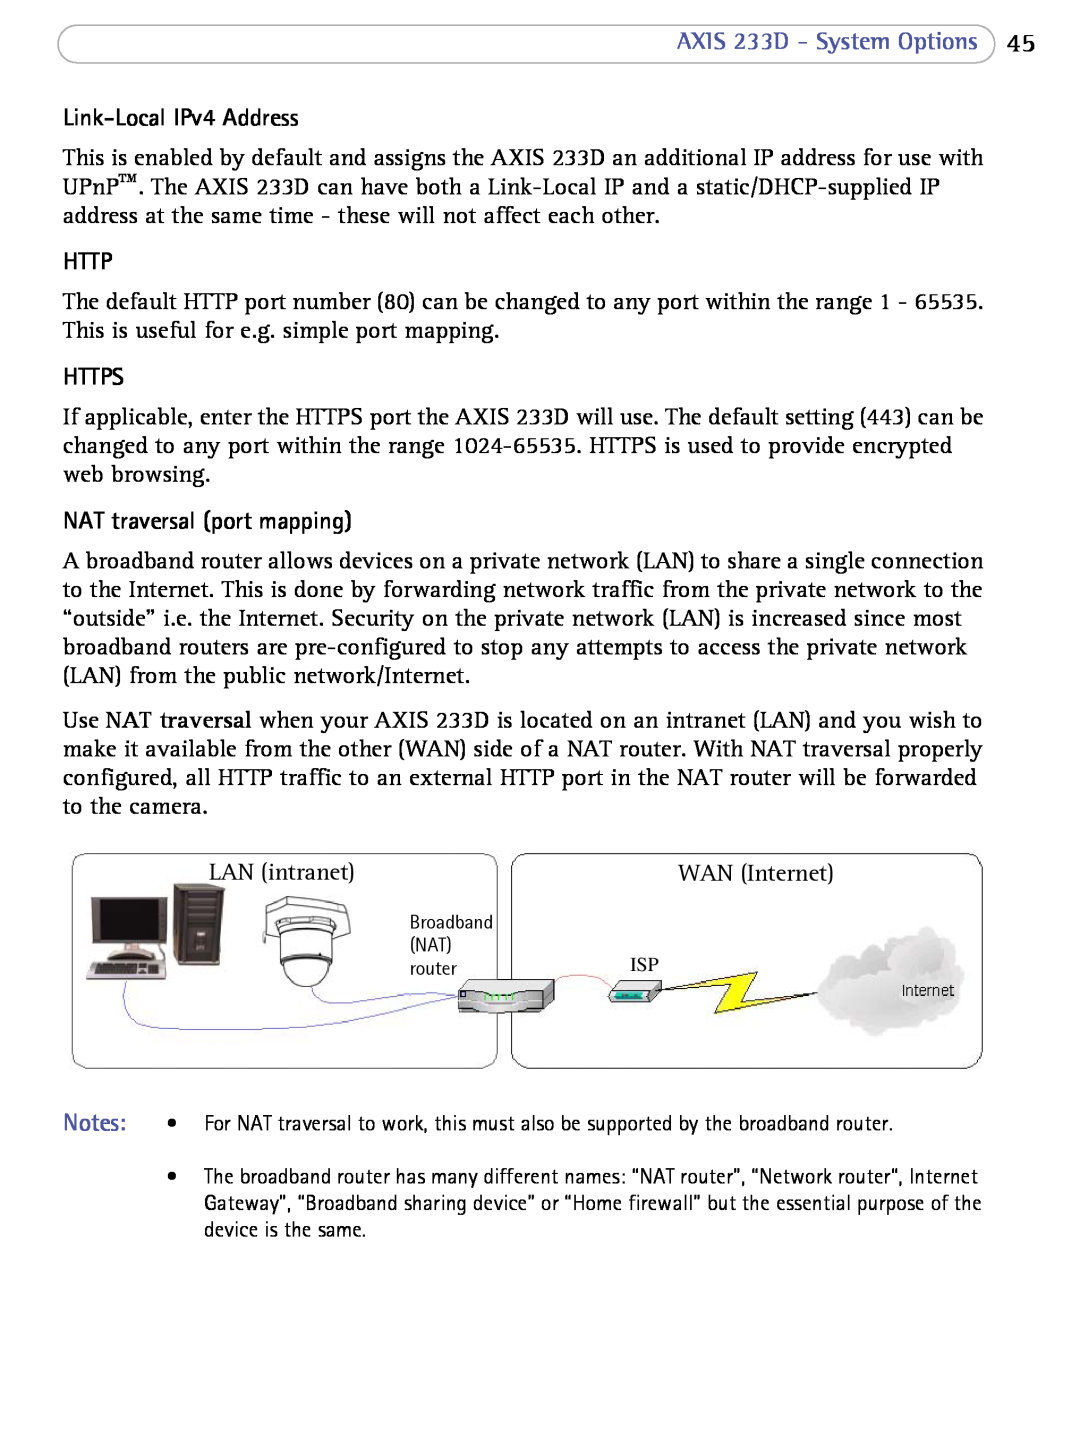 Axis Communications Link-Local IPv4 Address, NAT traversal port mapping, AXIS 233D - System Options, Https 